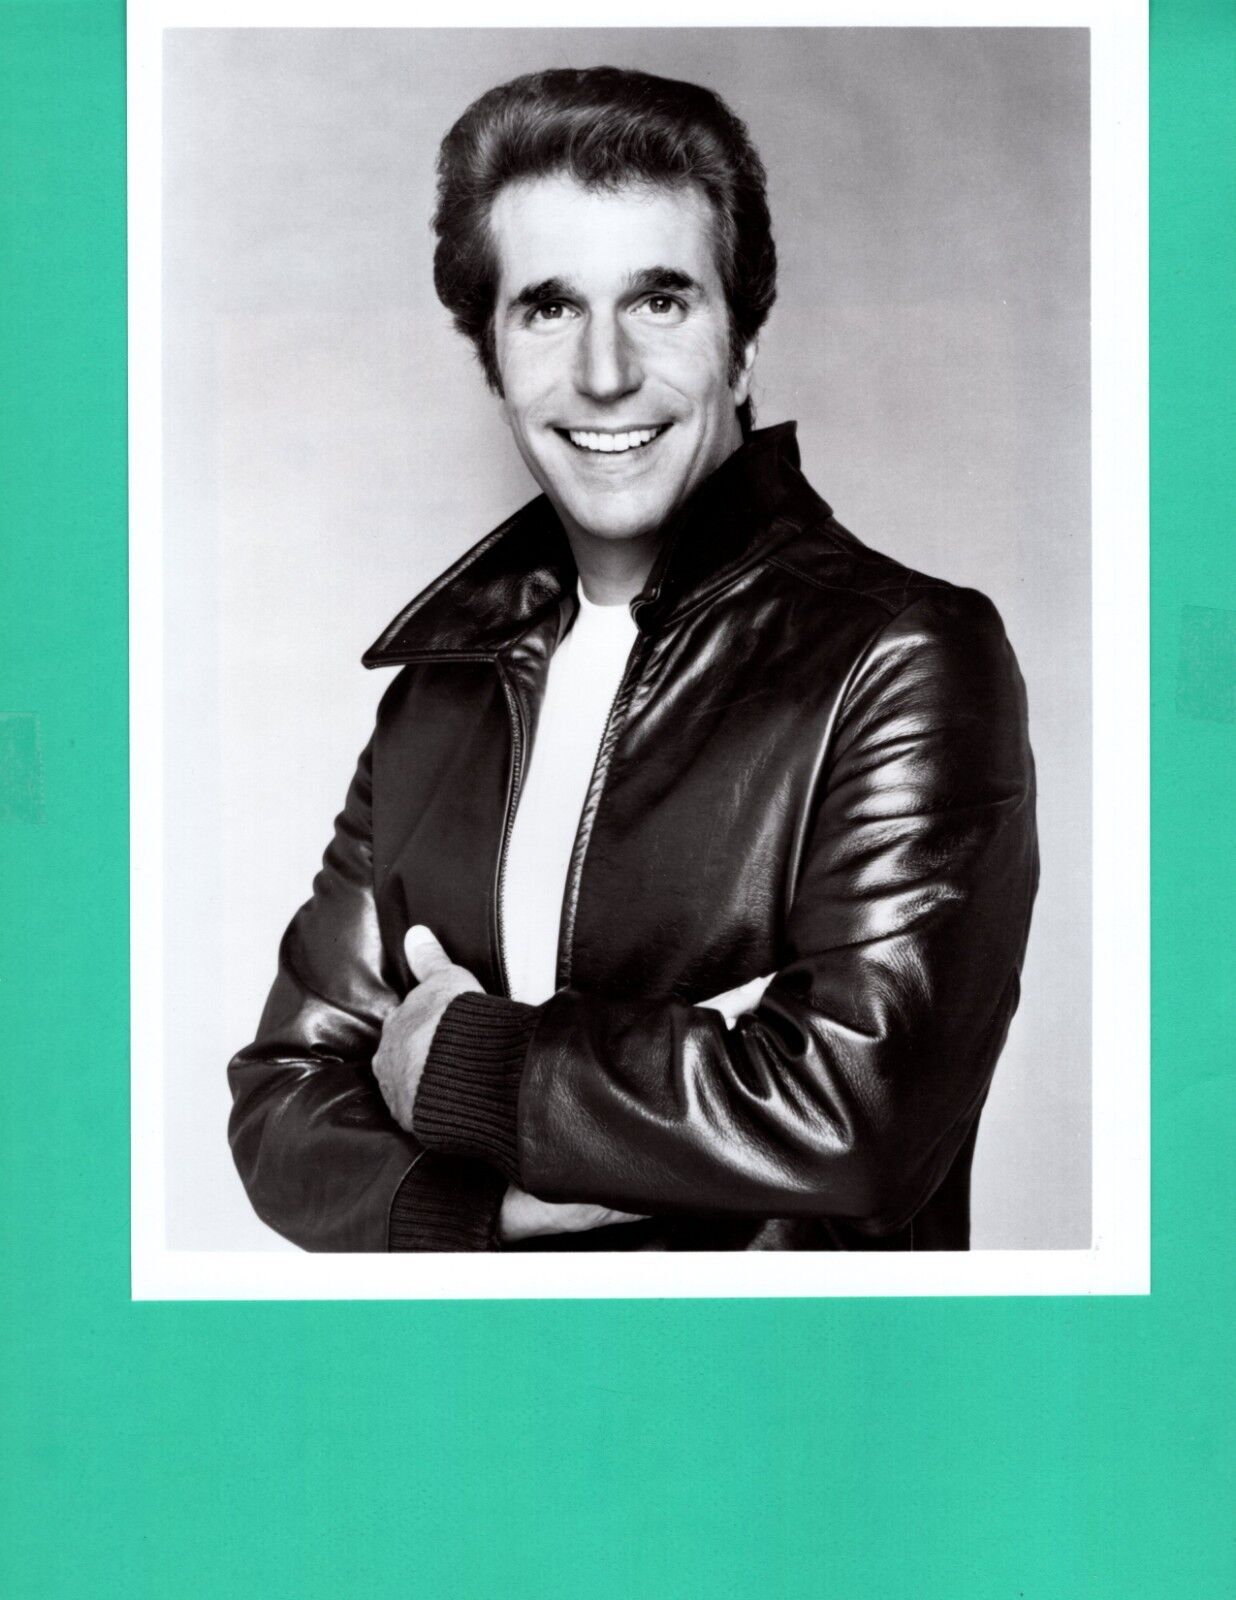 HENRY WINKLER Actor 1983 Fonz Happy Days News Press Promo Photo Poster painting 7x9 ABC